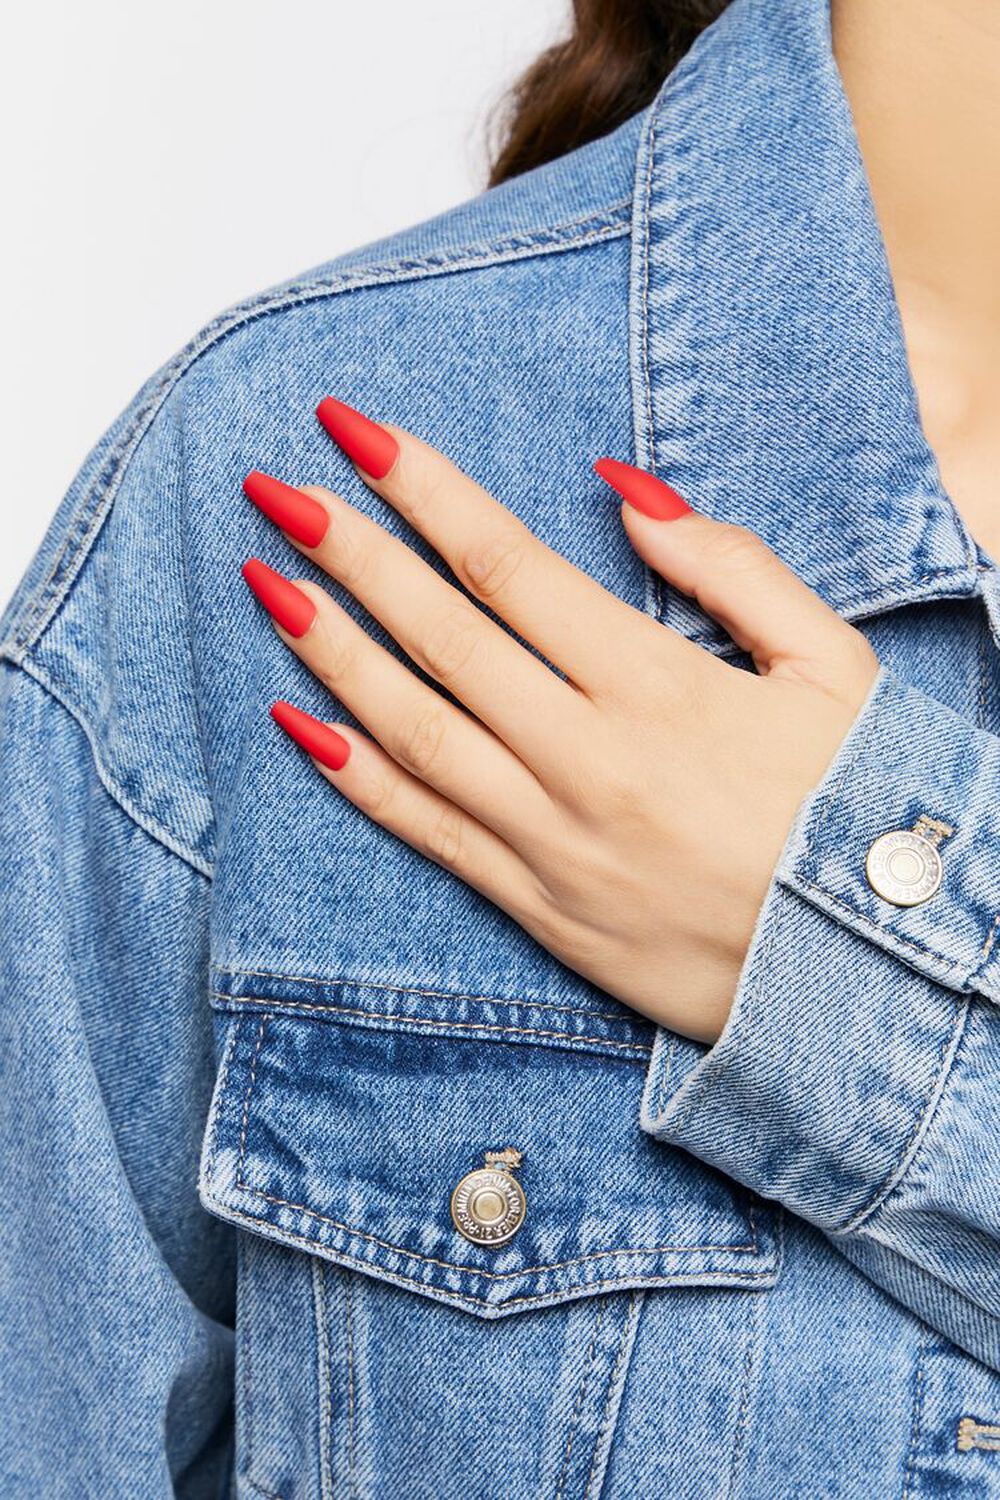 RED Matte Press-On Nails, image 1